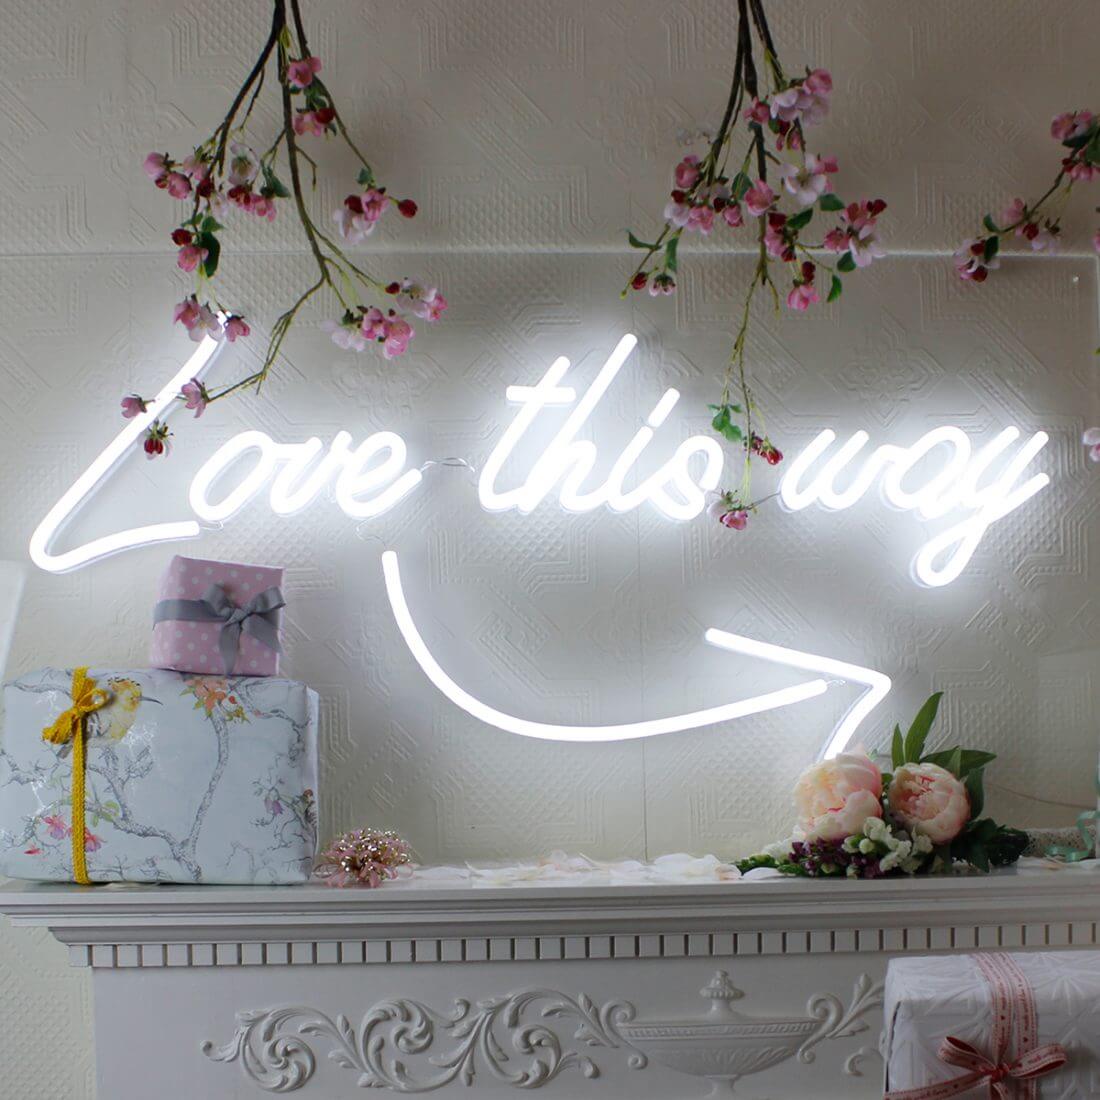 Use neon wedding signs for directional signs